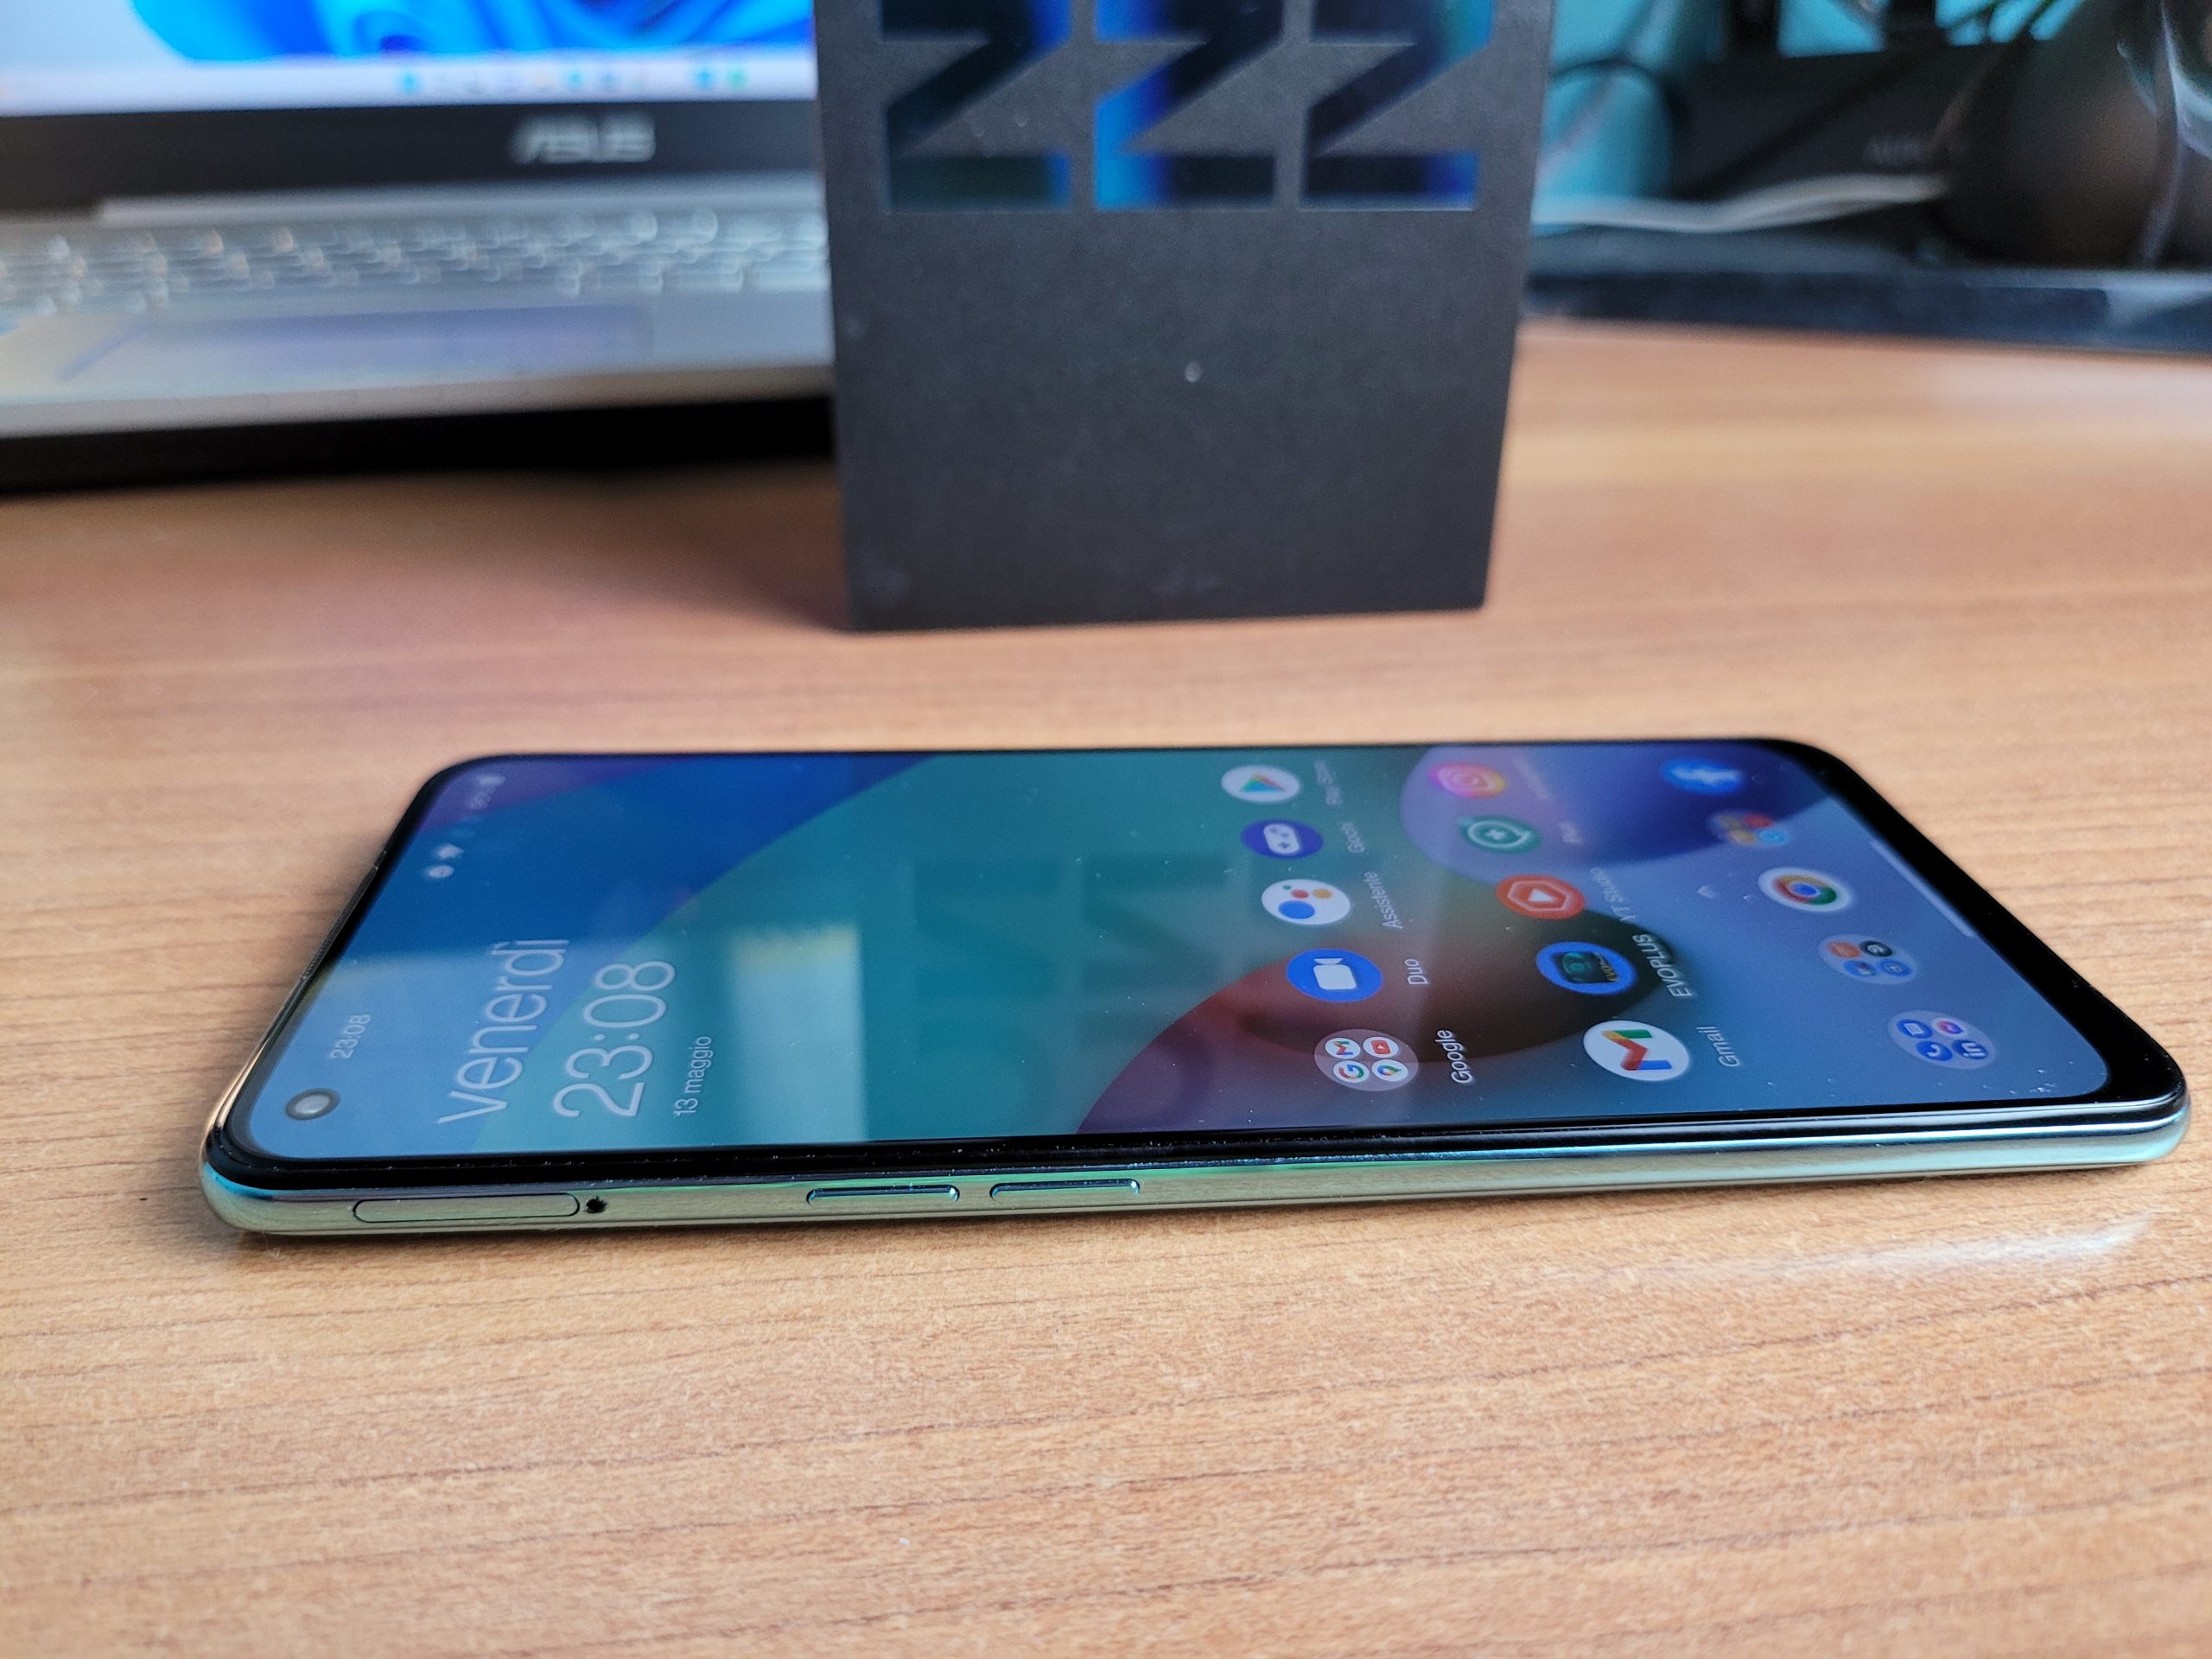 20220513 230817 scaled - OnePlus Nord CE 2 5G recensione